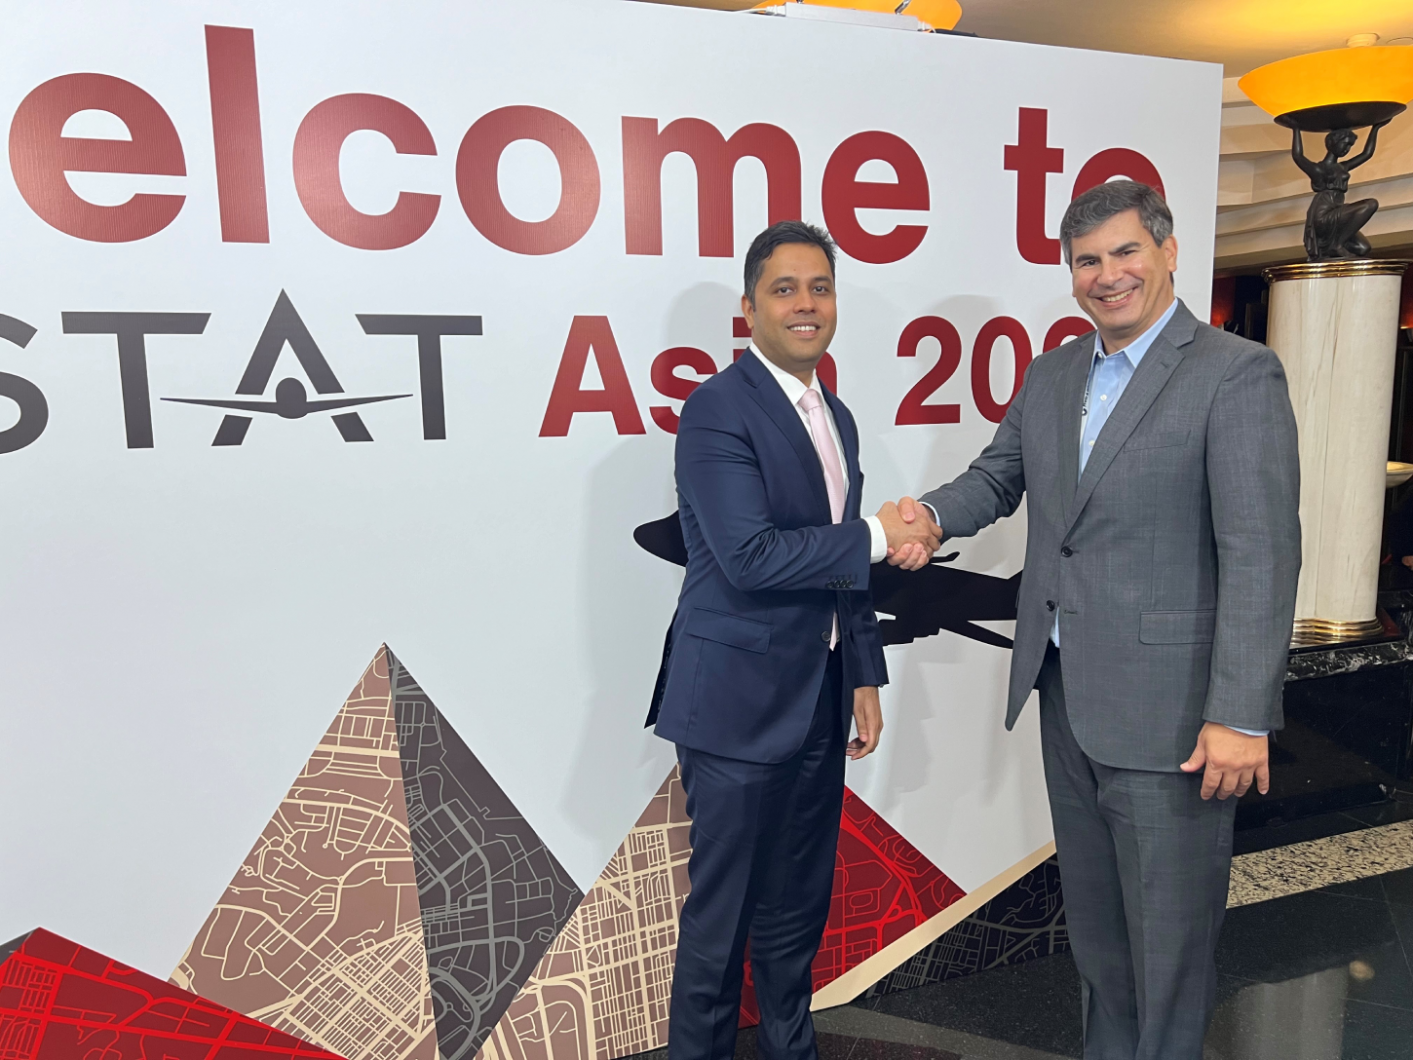 The deal was announced during the International Society of Transport Aircraft Trading (ISTAT) Asia in Hong Kong